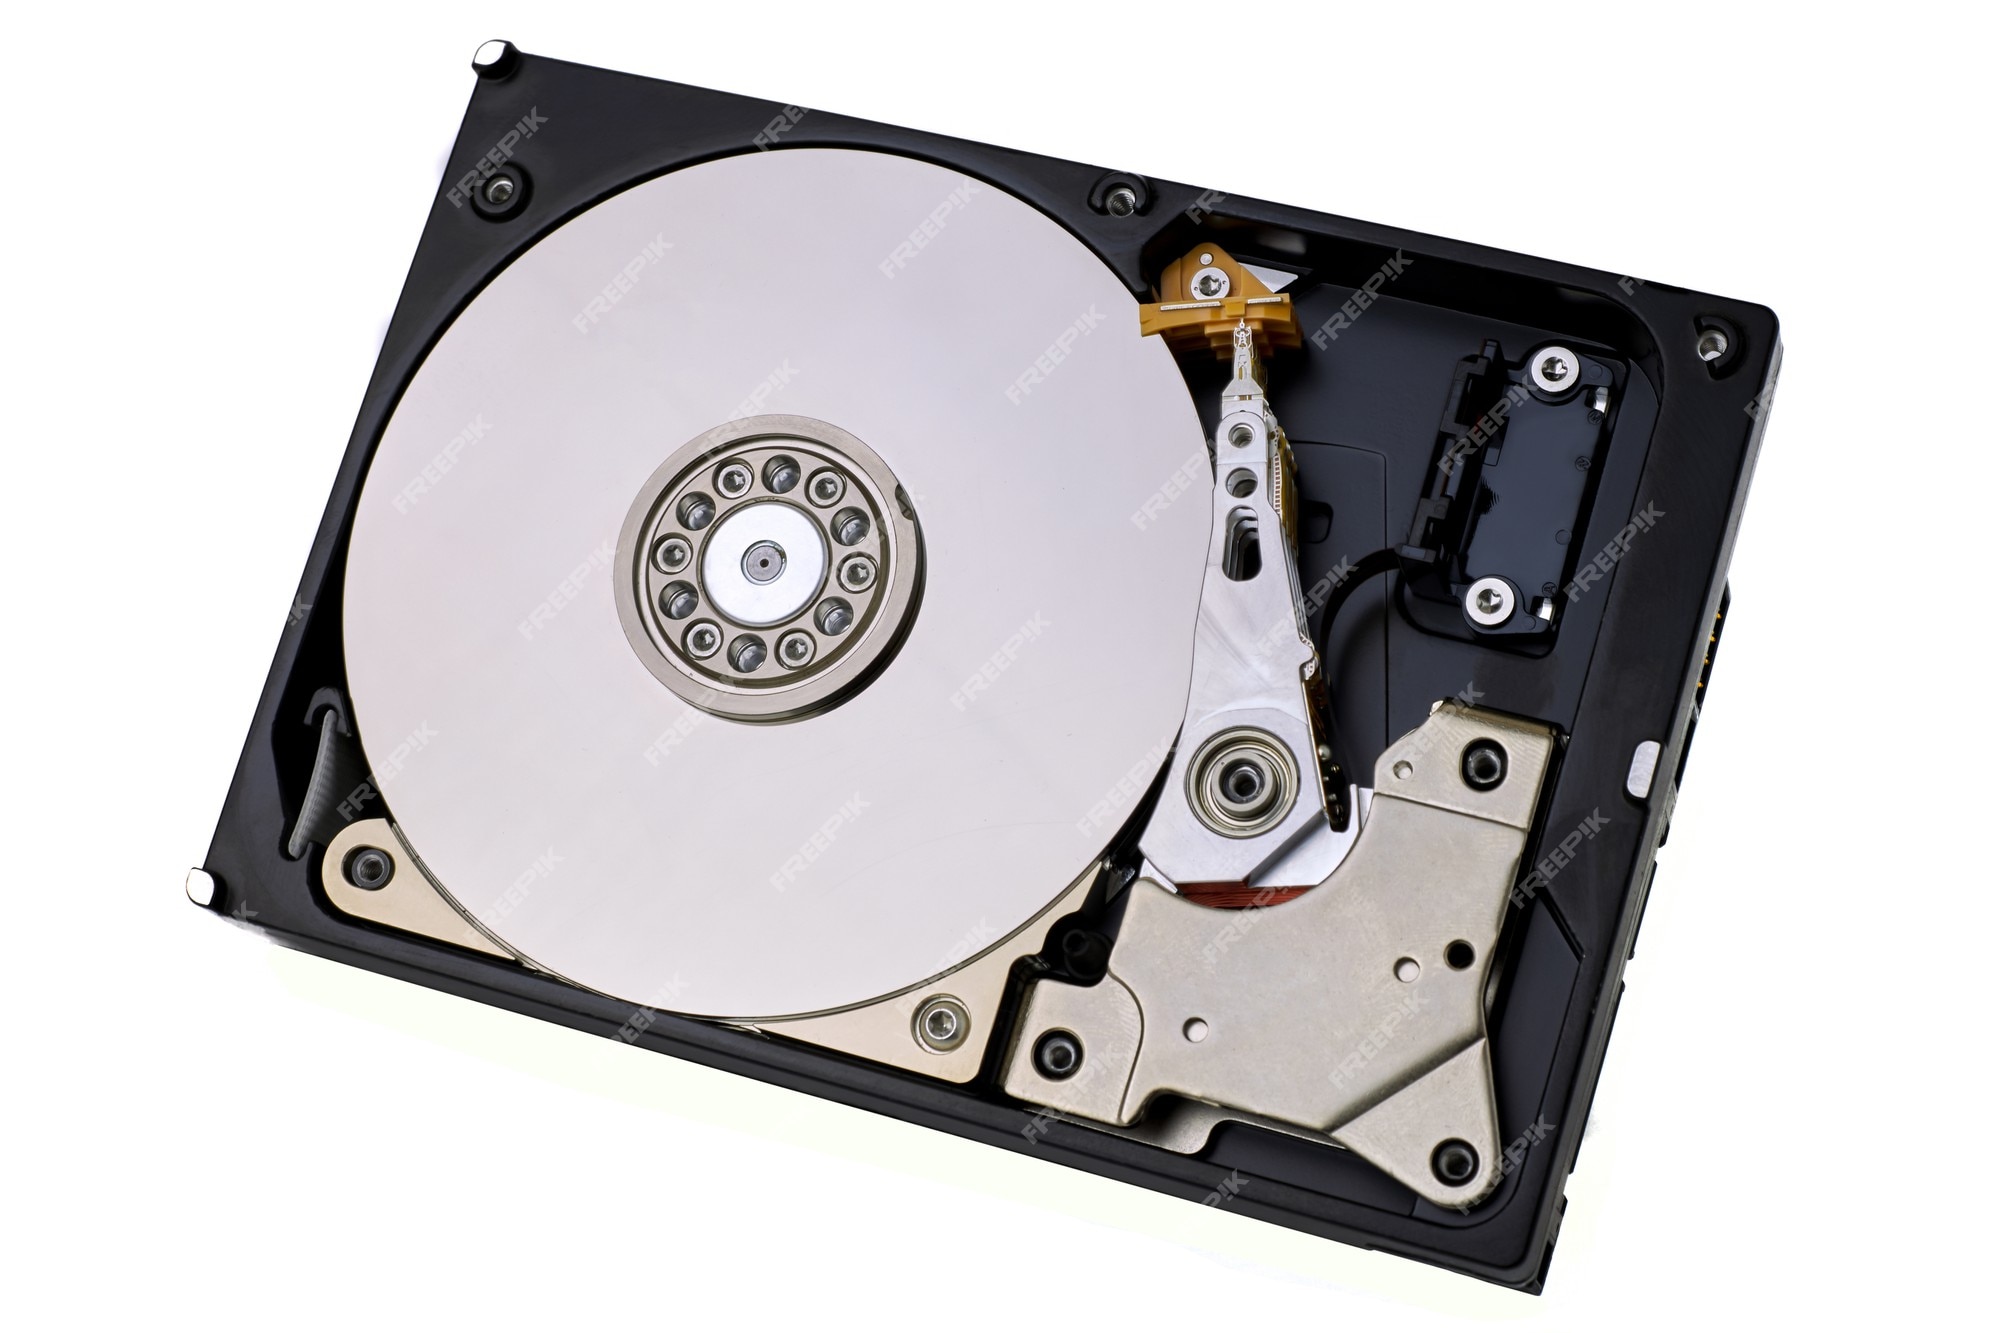 Pløje Banyan Illusion Premium Photo | Hard disk drive isolated. a computer's hdd data storage  without protective cover, show the magnetic disk and electronic components  inside the device.